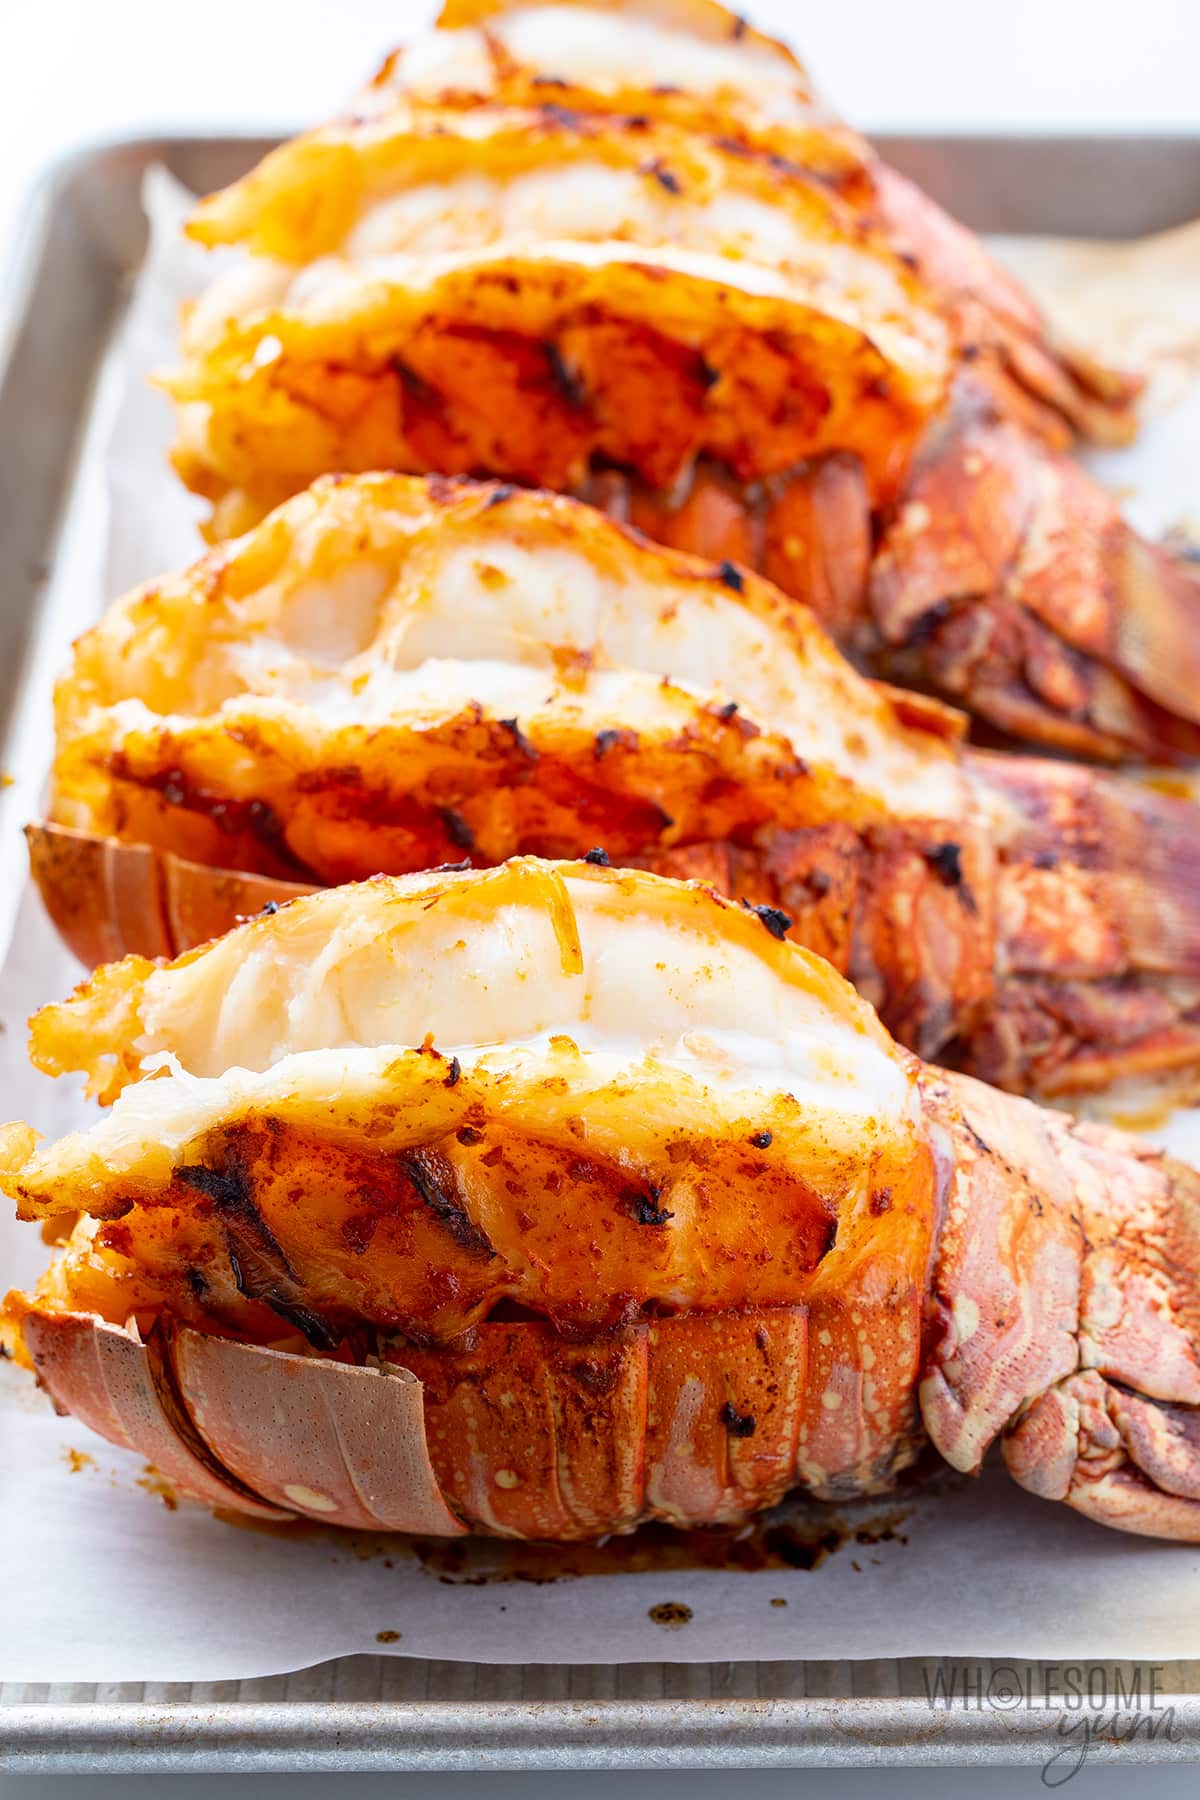 Learn how to cook lobster perfectly every time, just like the tails shown here, using my broiling method.